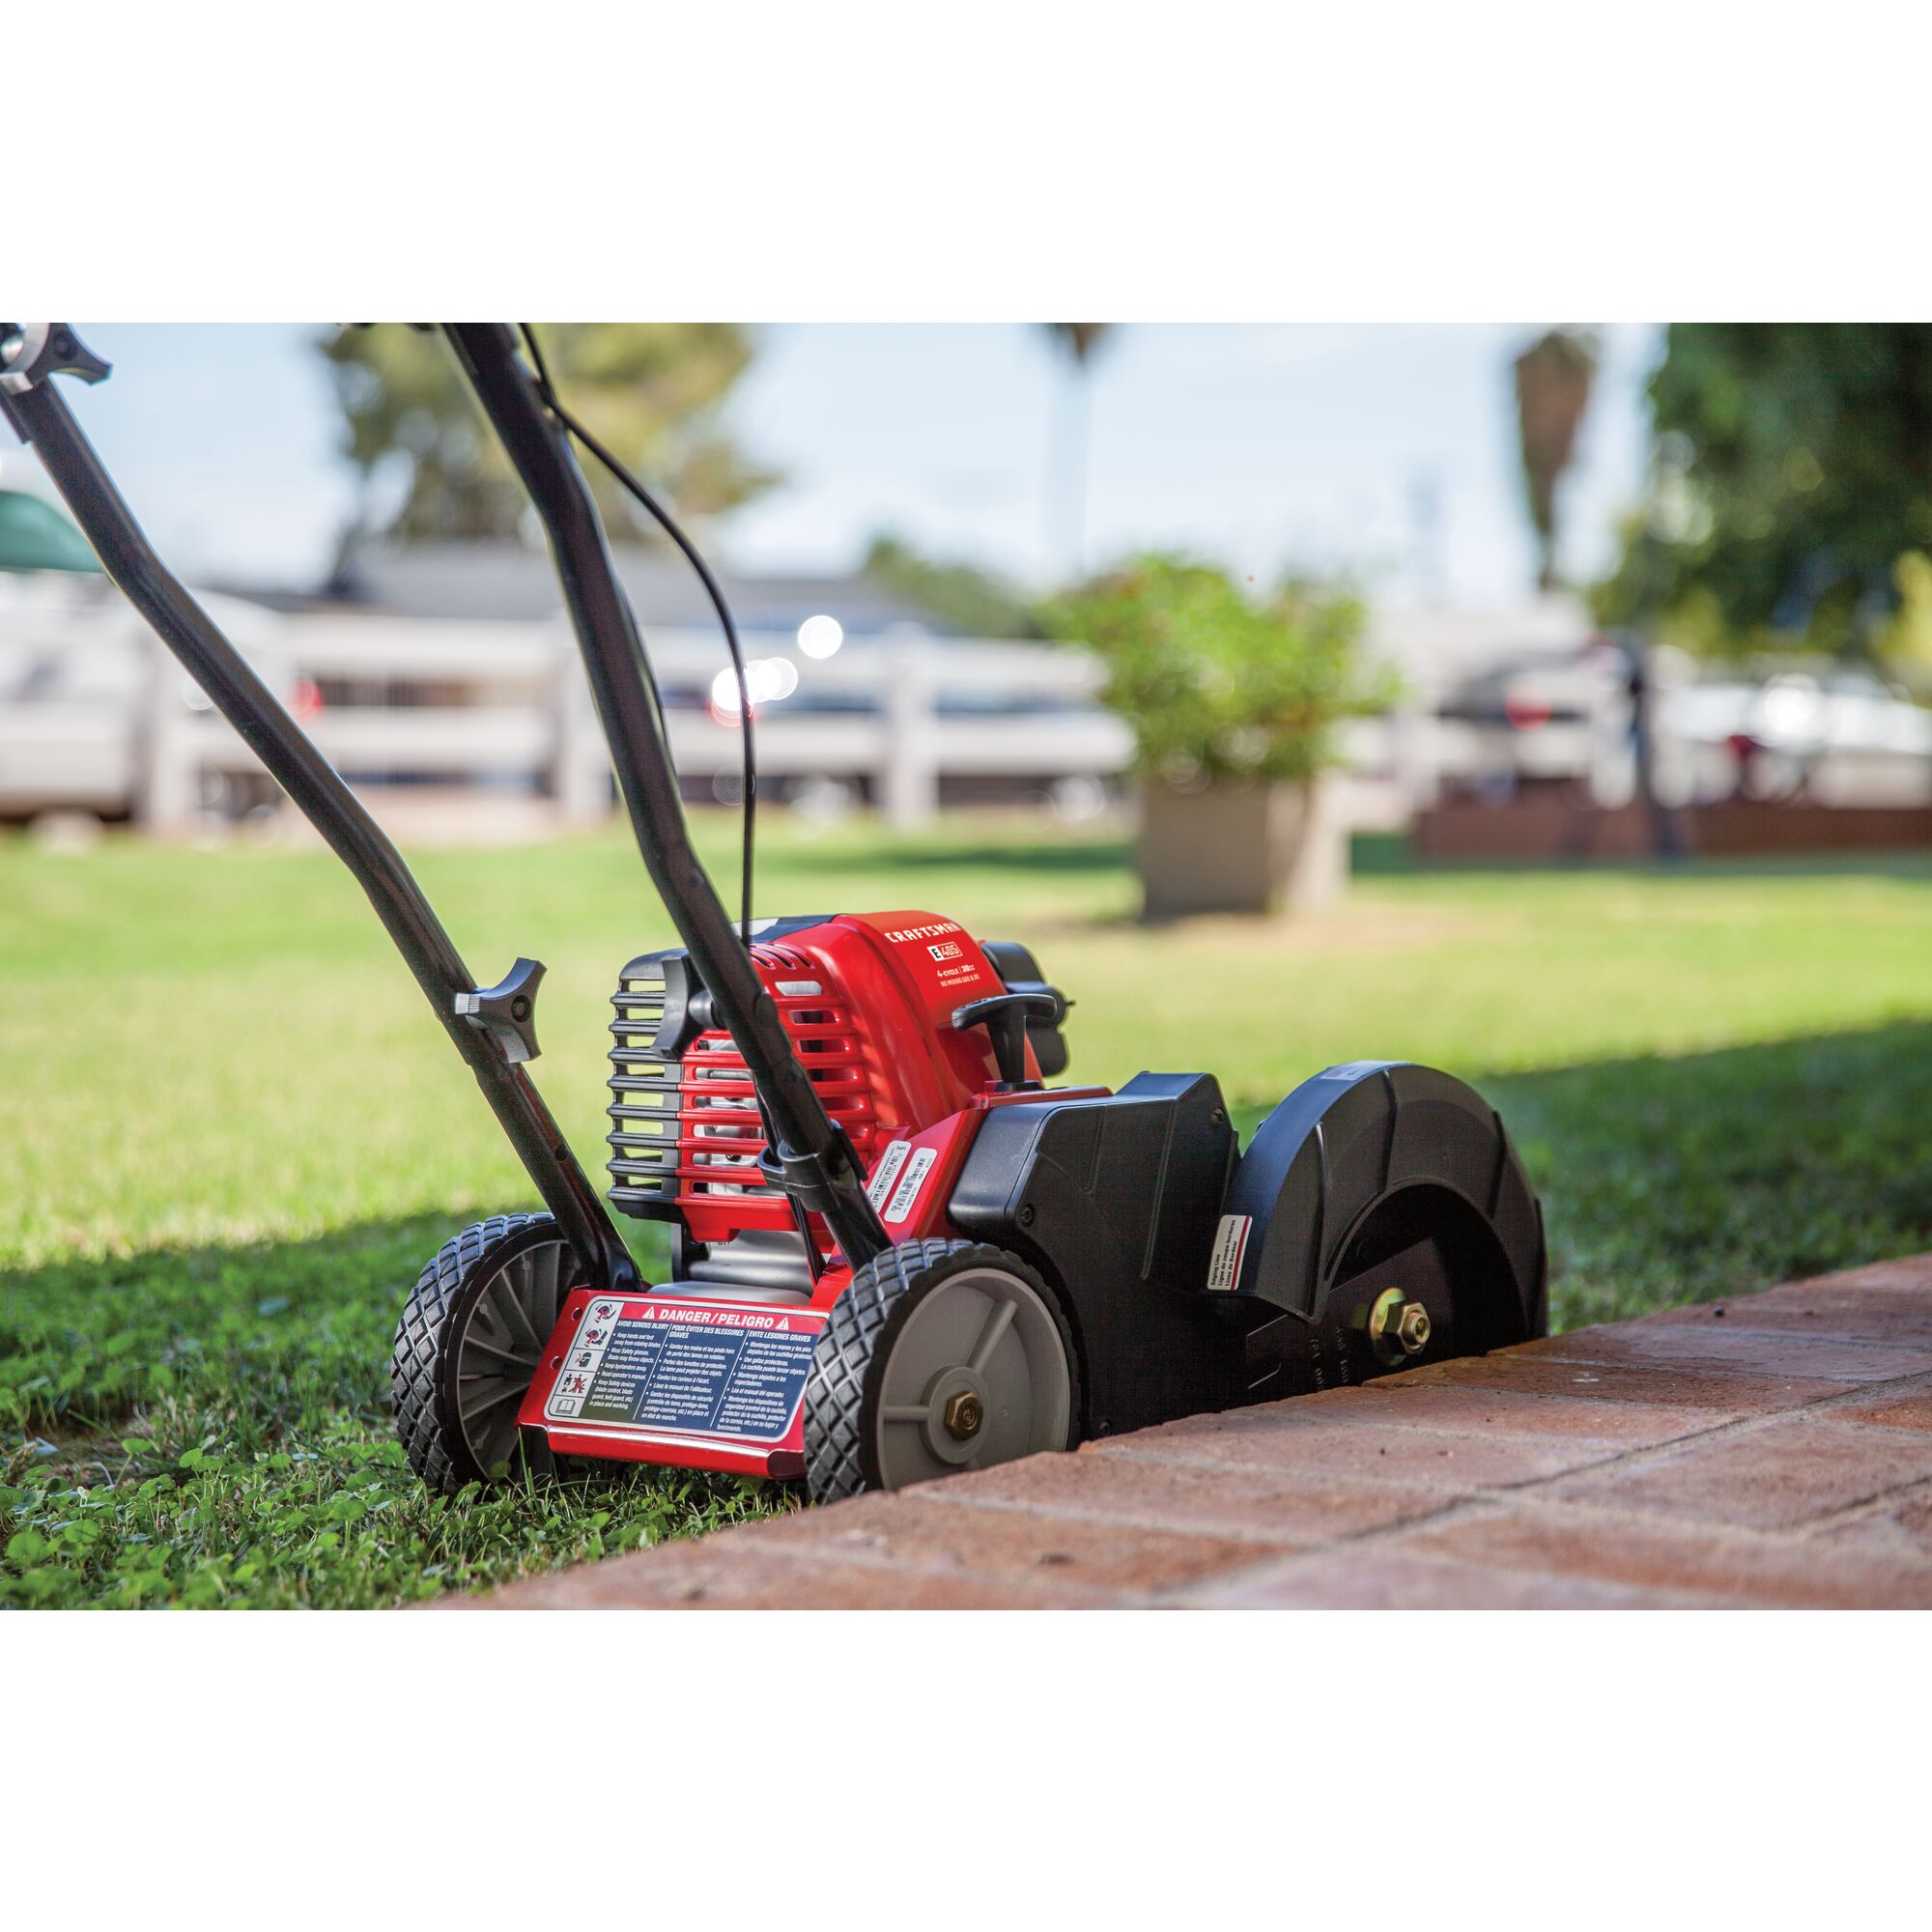 CRAFTSMAN E405 Gas Edger zoomed out edging grass near brick